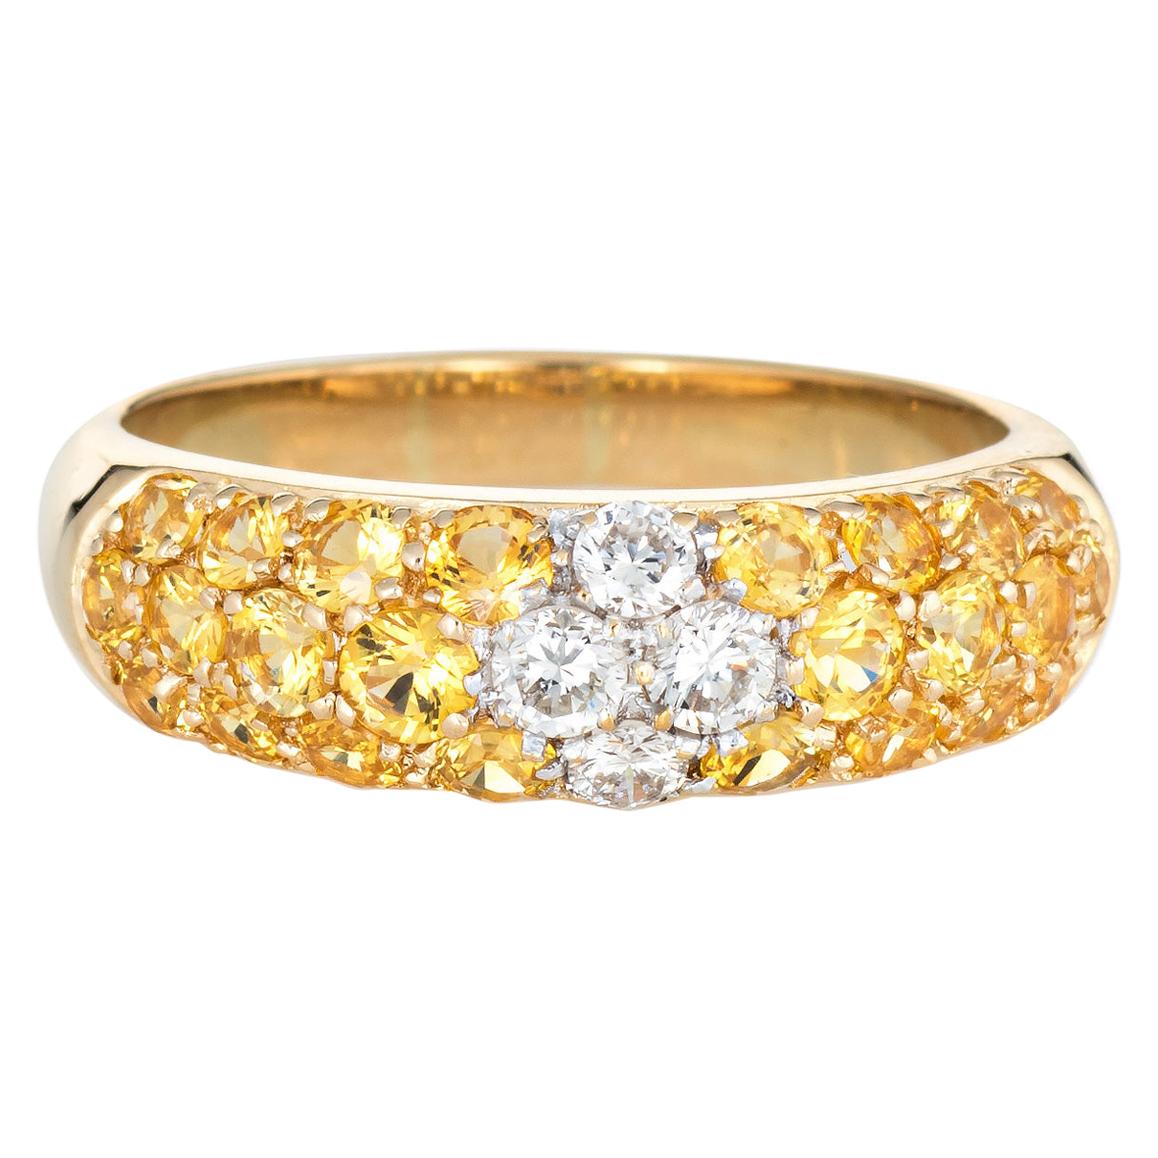 Yellow Sapphire Diamond Band Estate 18k Gold Stacking Ring Fine Vintage Jewelry